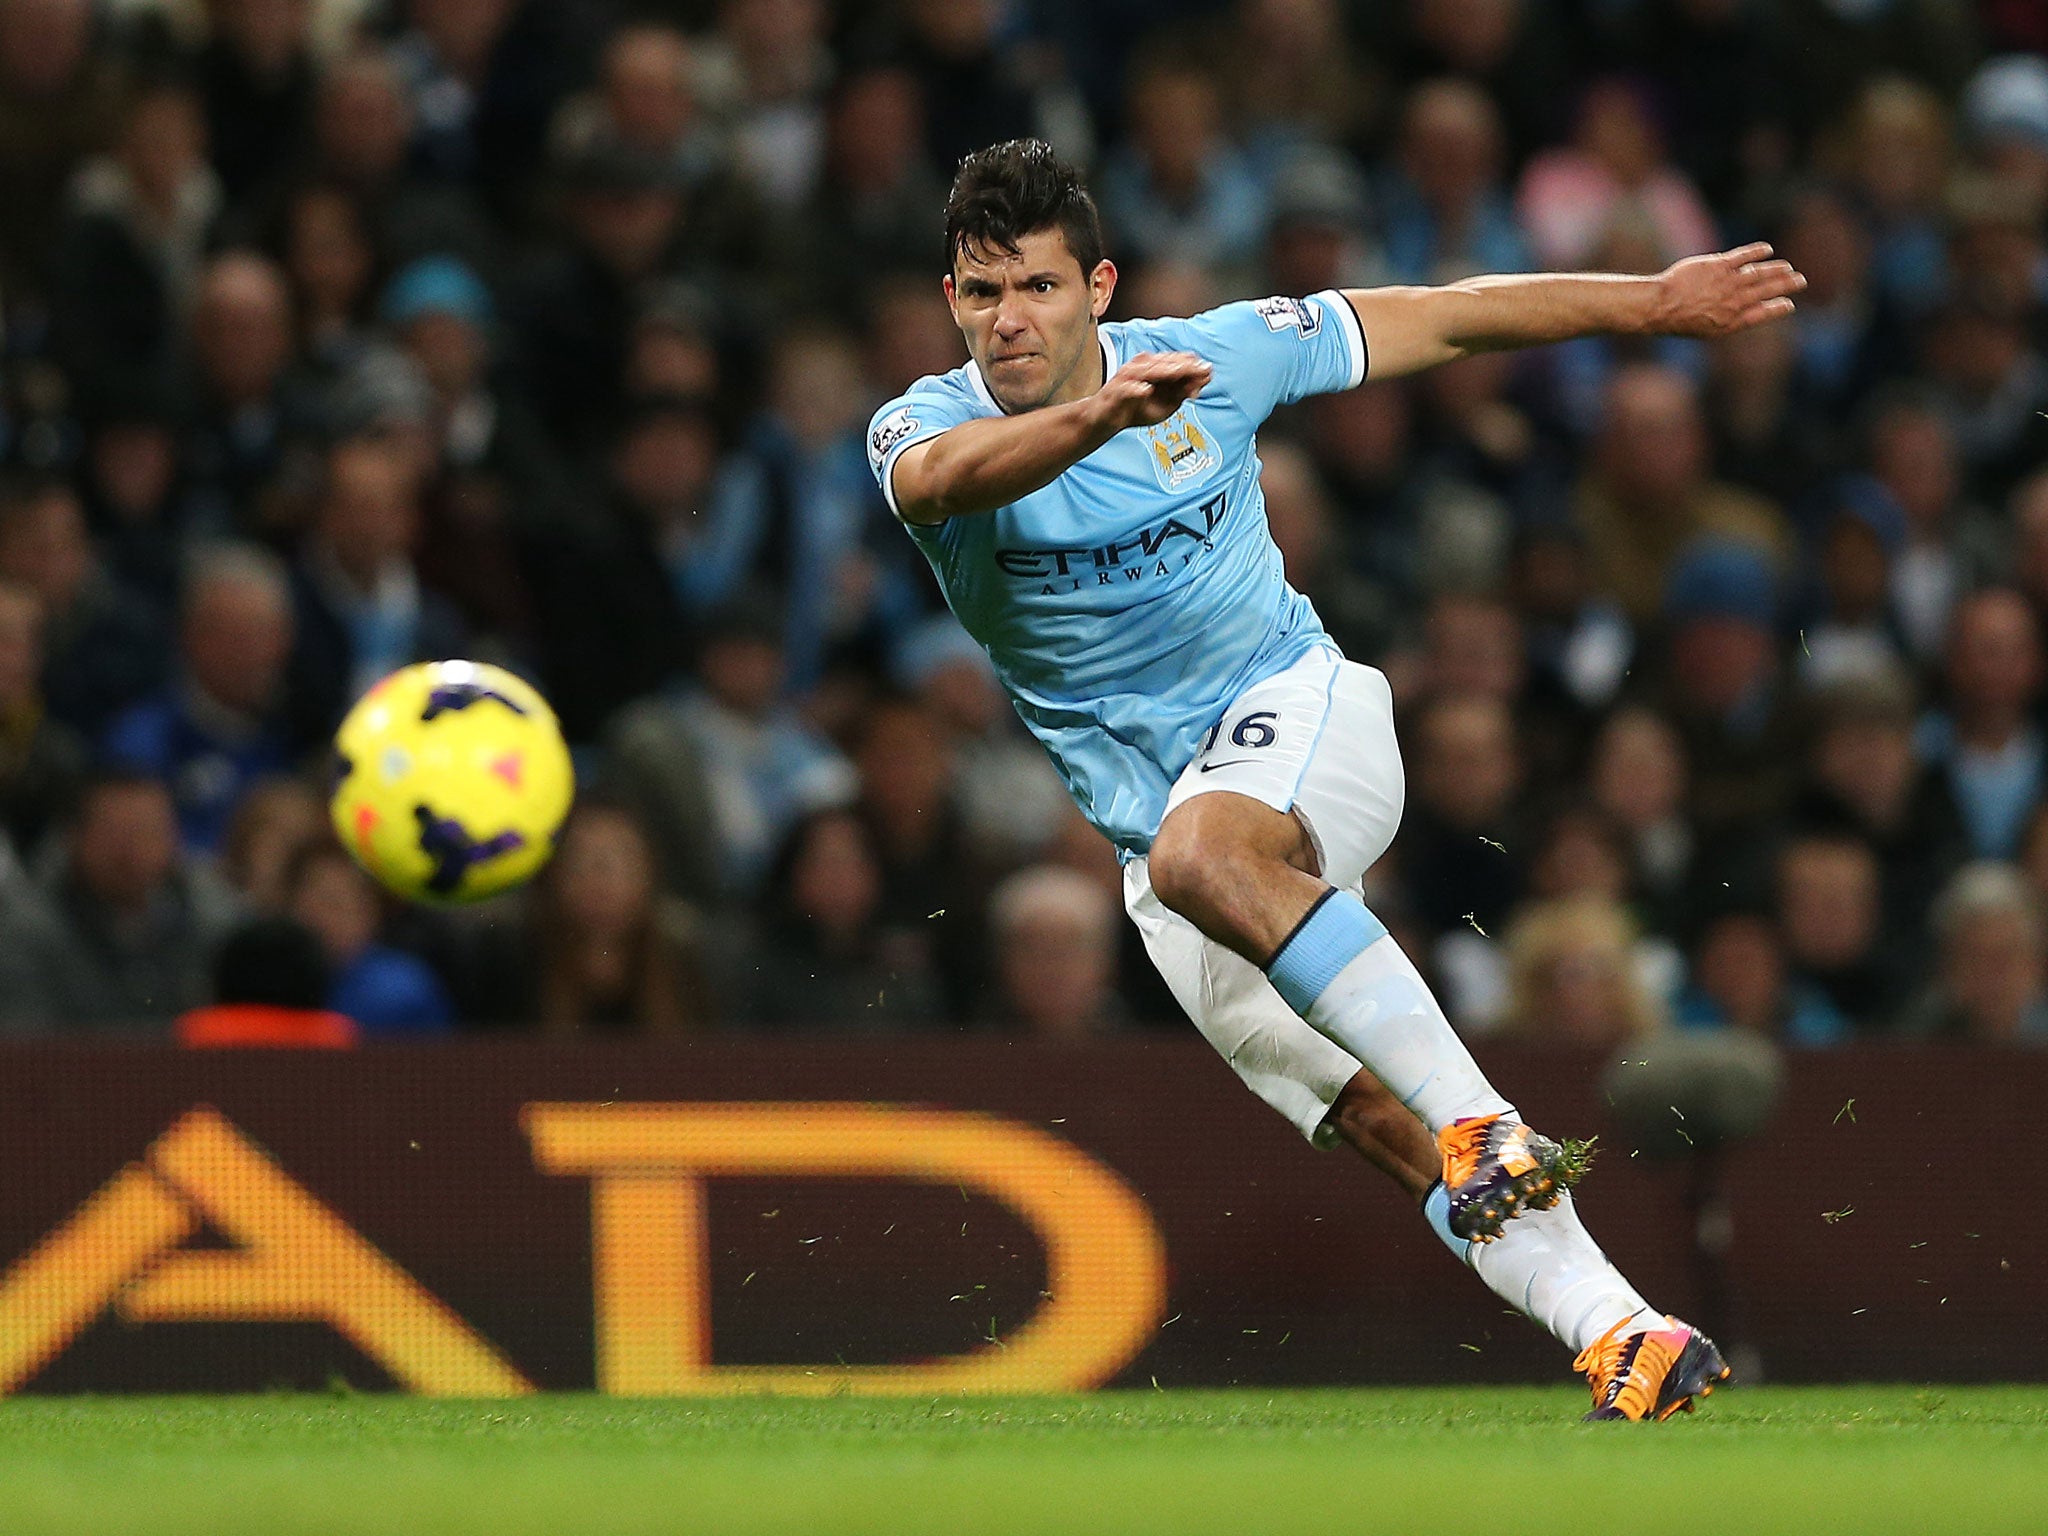 Barcelona have rubbished suggestions that they could make a January move for Manchester City striker Sergio Aguero